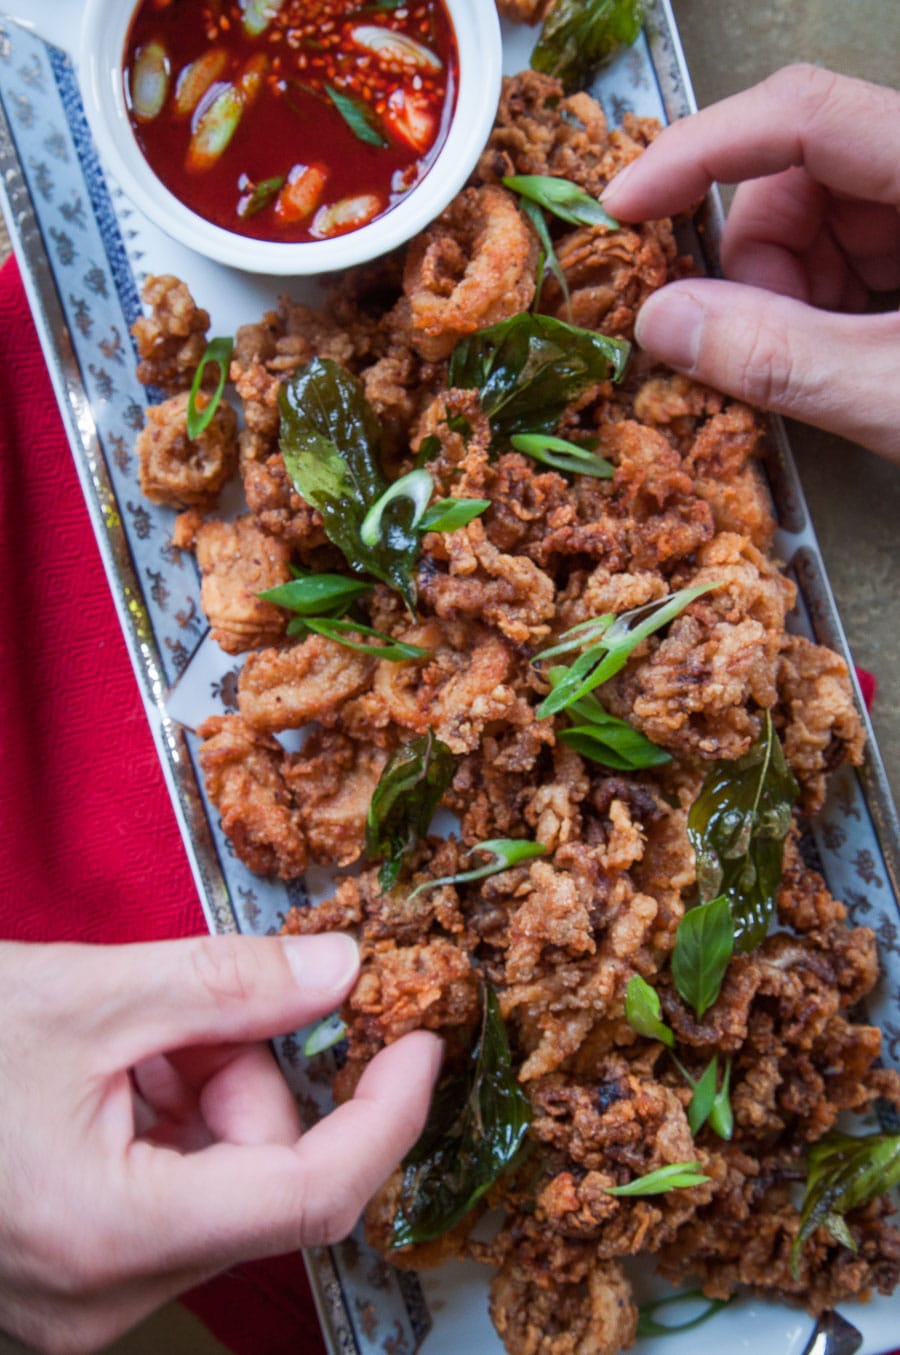 Asian-Inspired Fried Calamari with Gochuchang Dipping Sauce. Photo and recipe by Irvin Lin of Eat the Love.